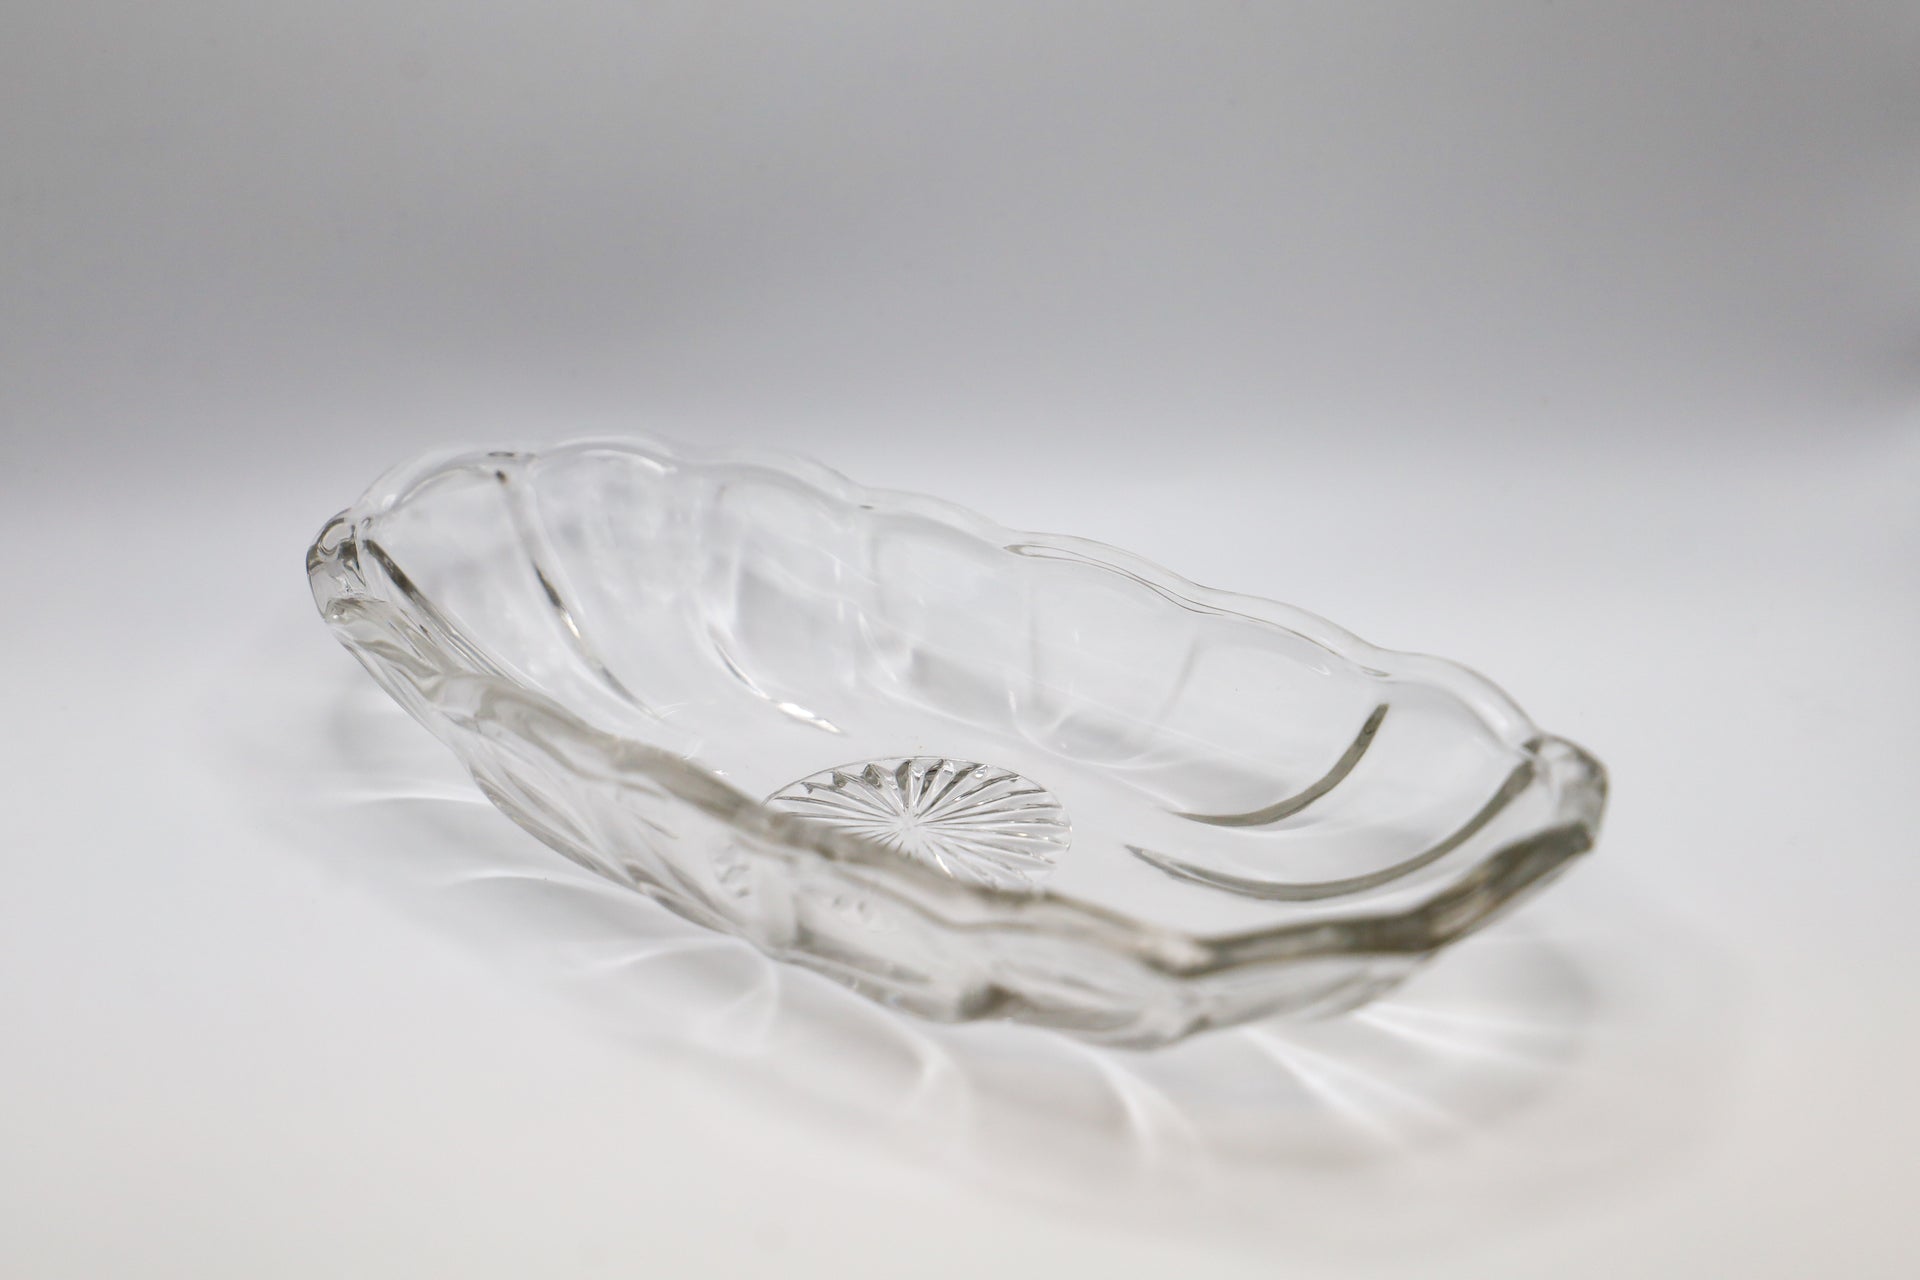 Clear Banana Boat dish with scalloped edges